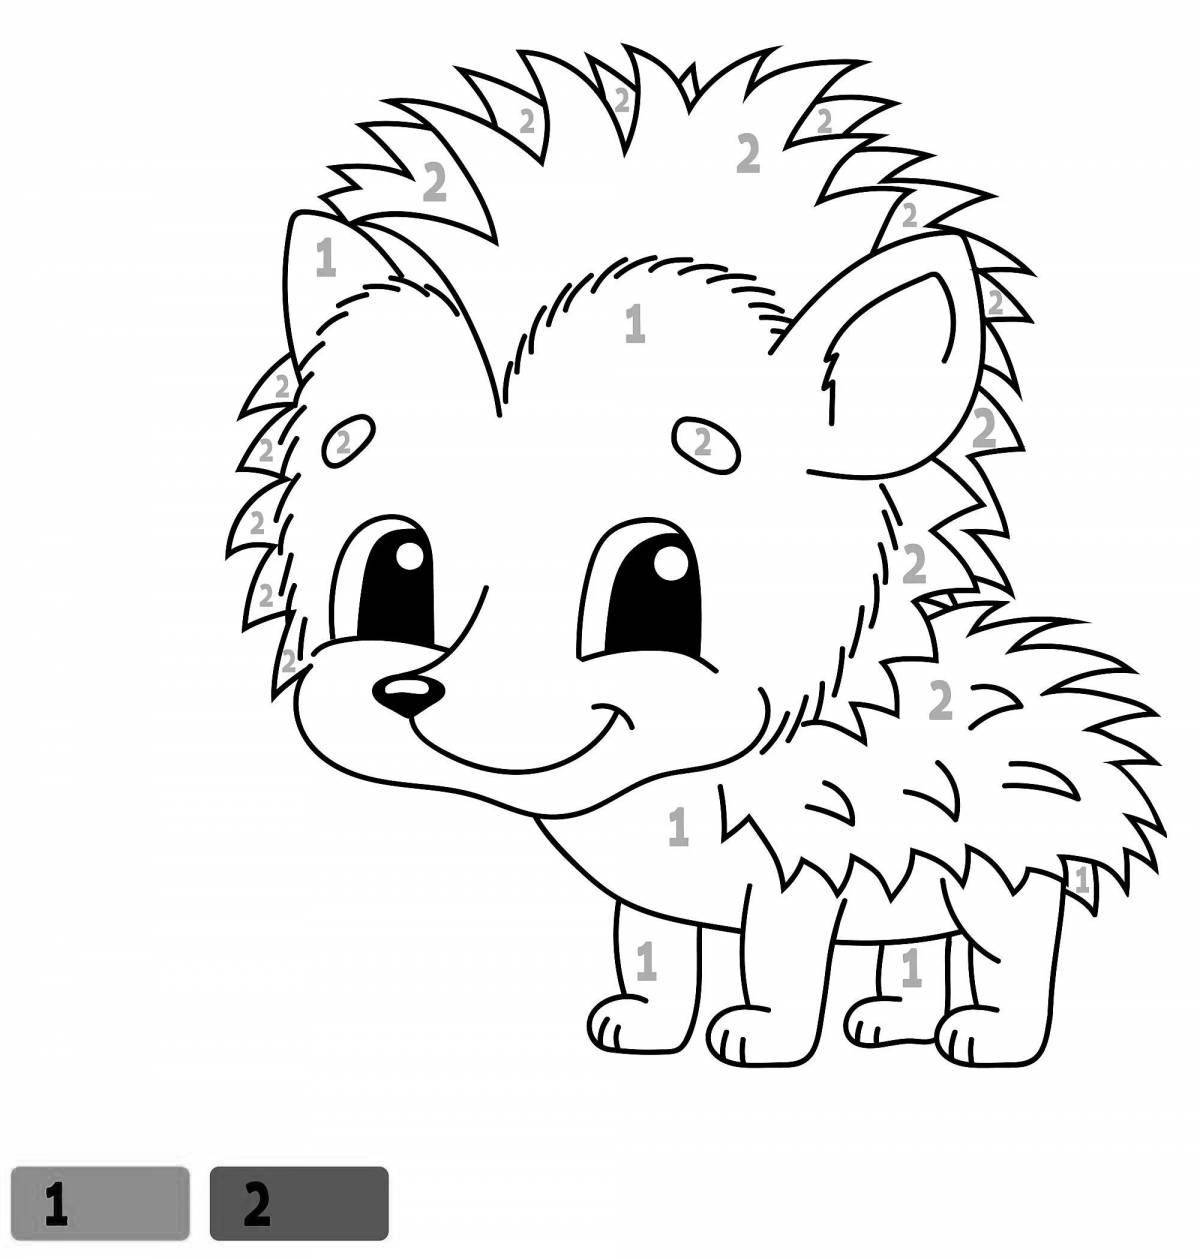 Exciting hedgehog by numbers coloring book